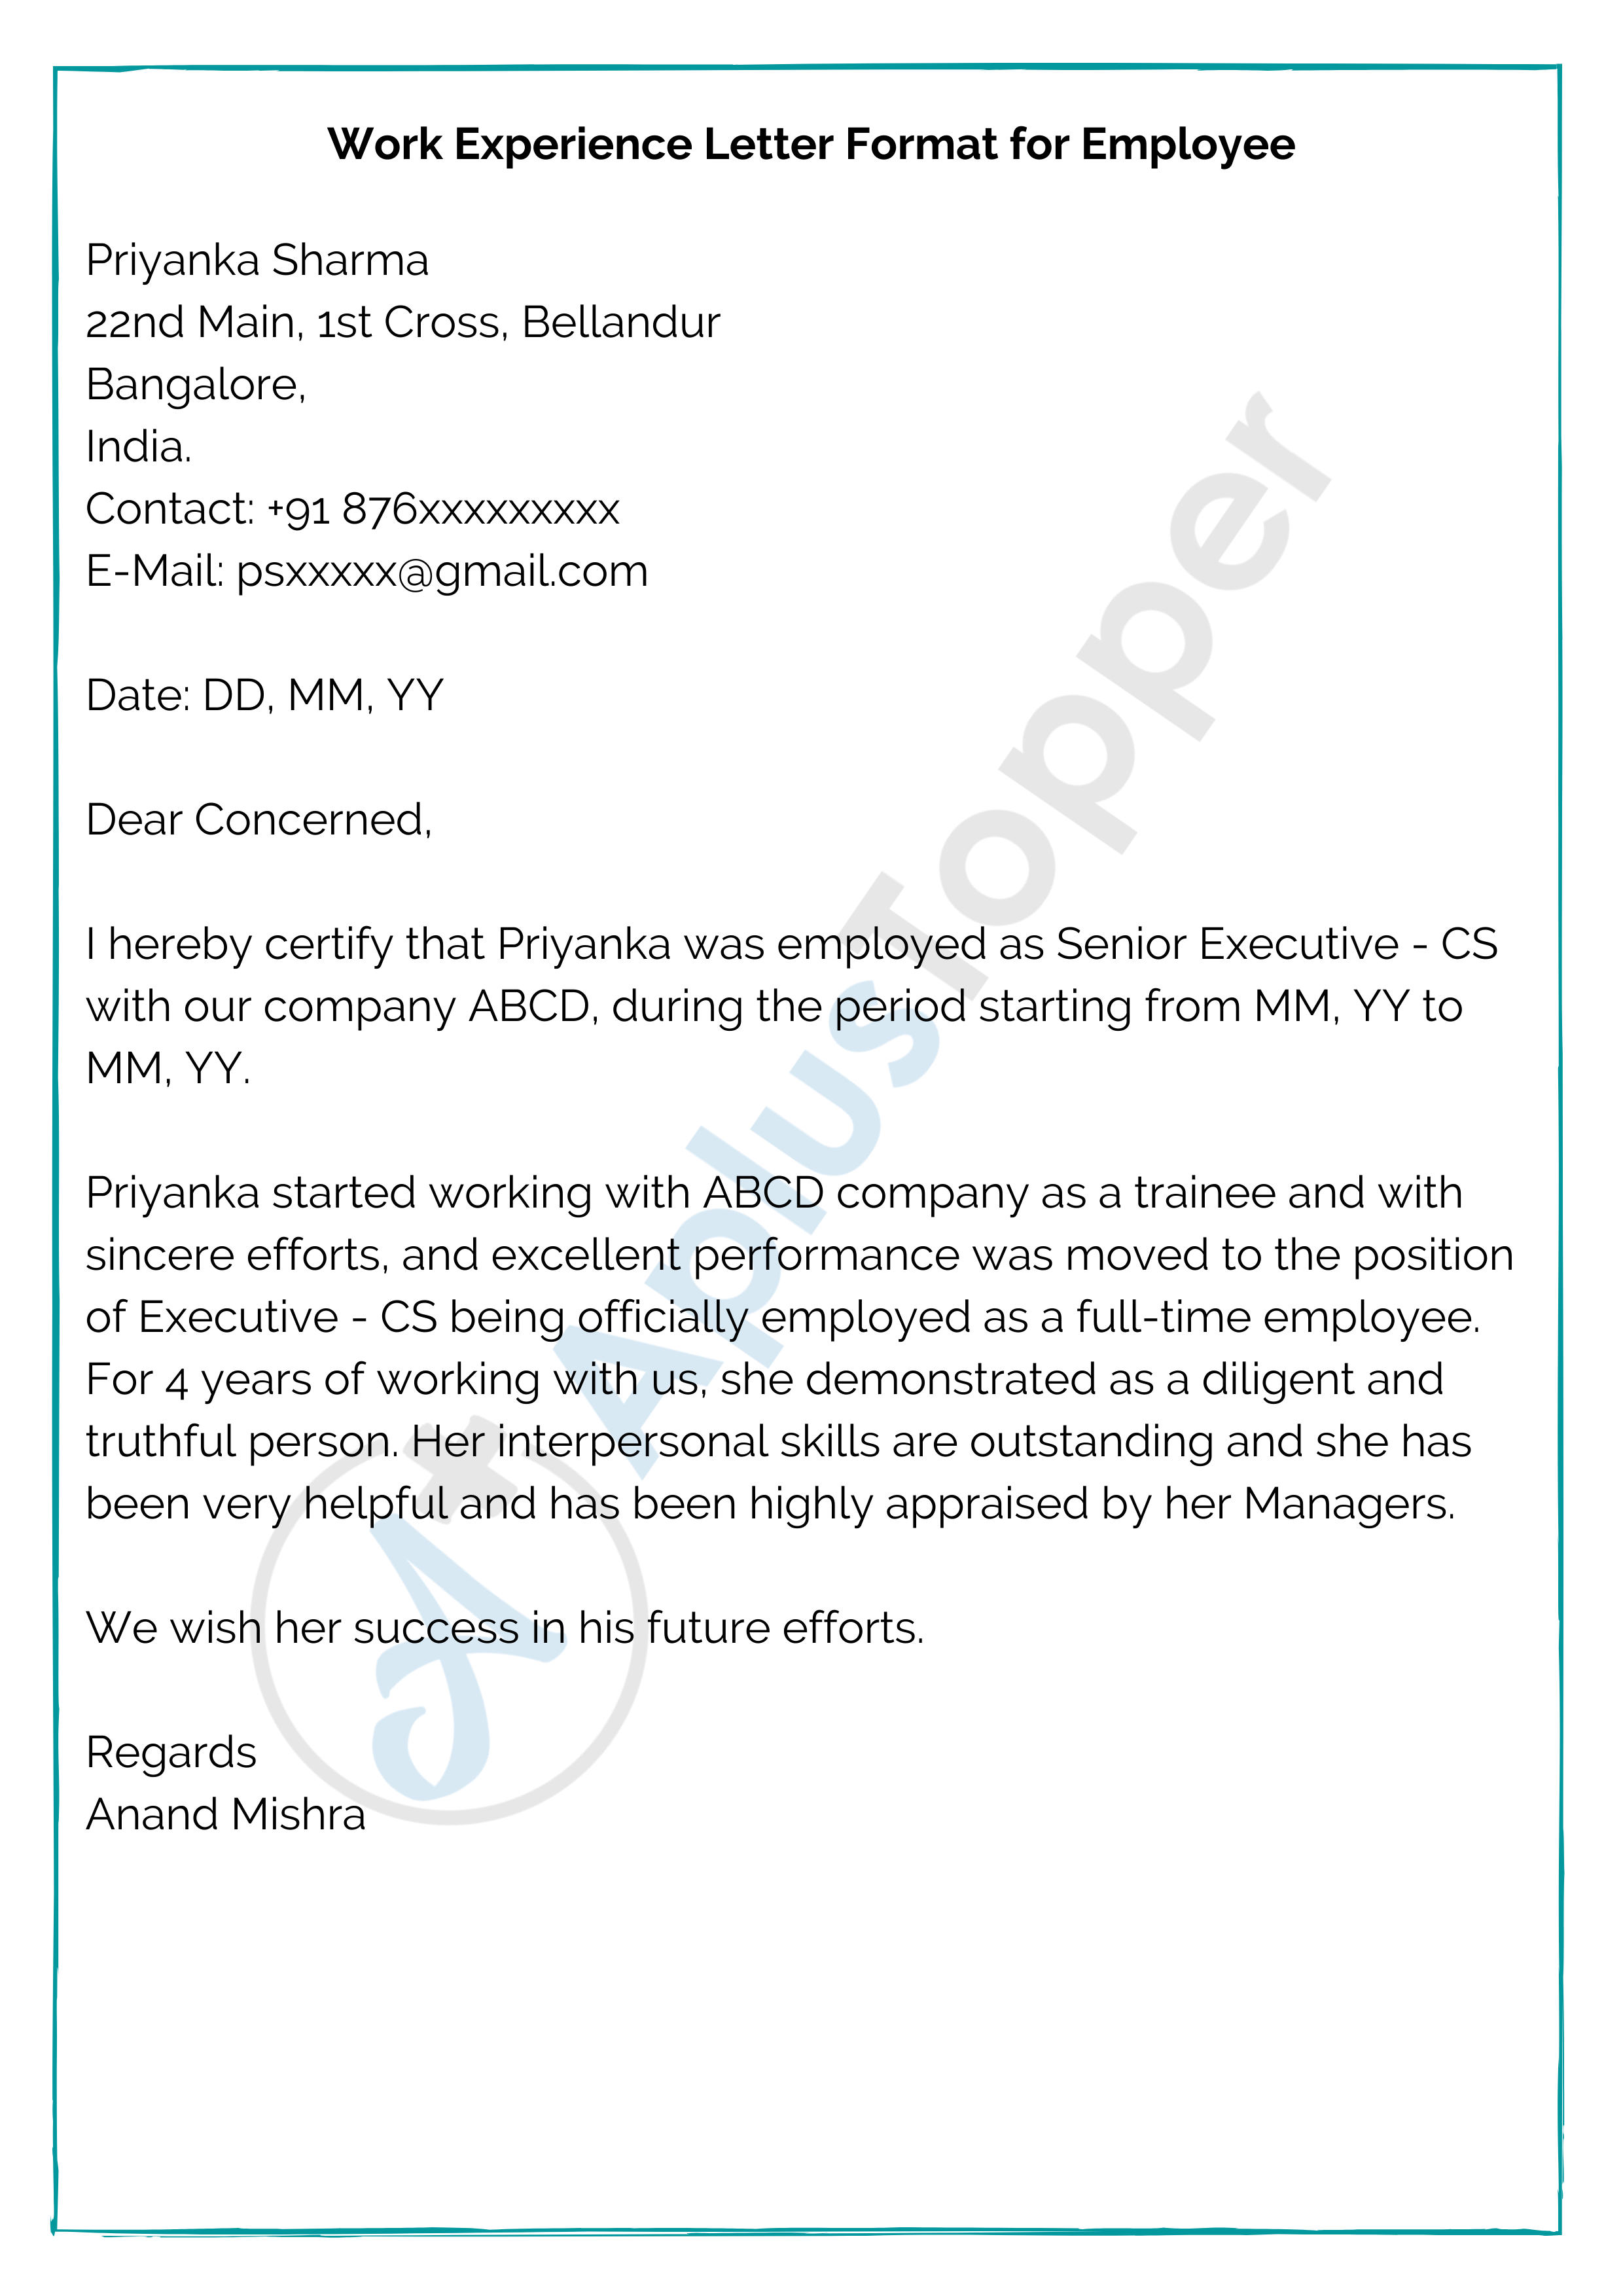 Experience Letter Format  Work Experience Letter, Samples, How To Regarding Template Of Experience Certificate